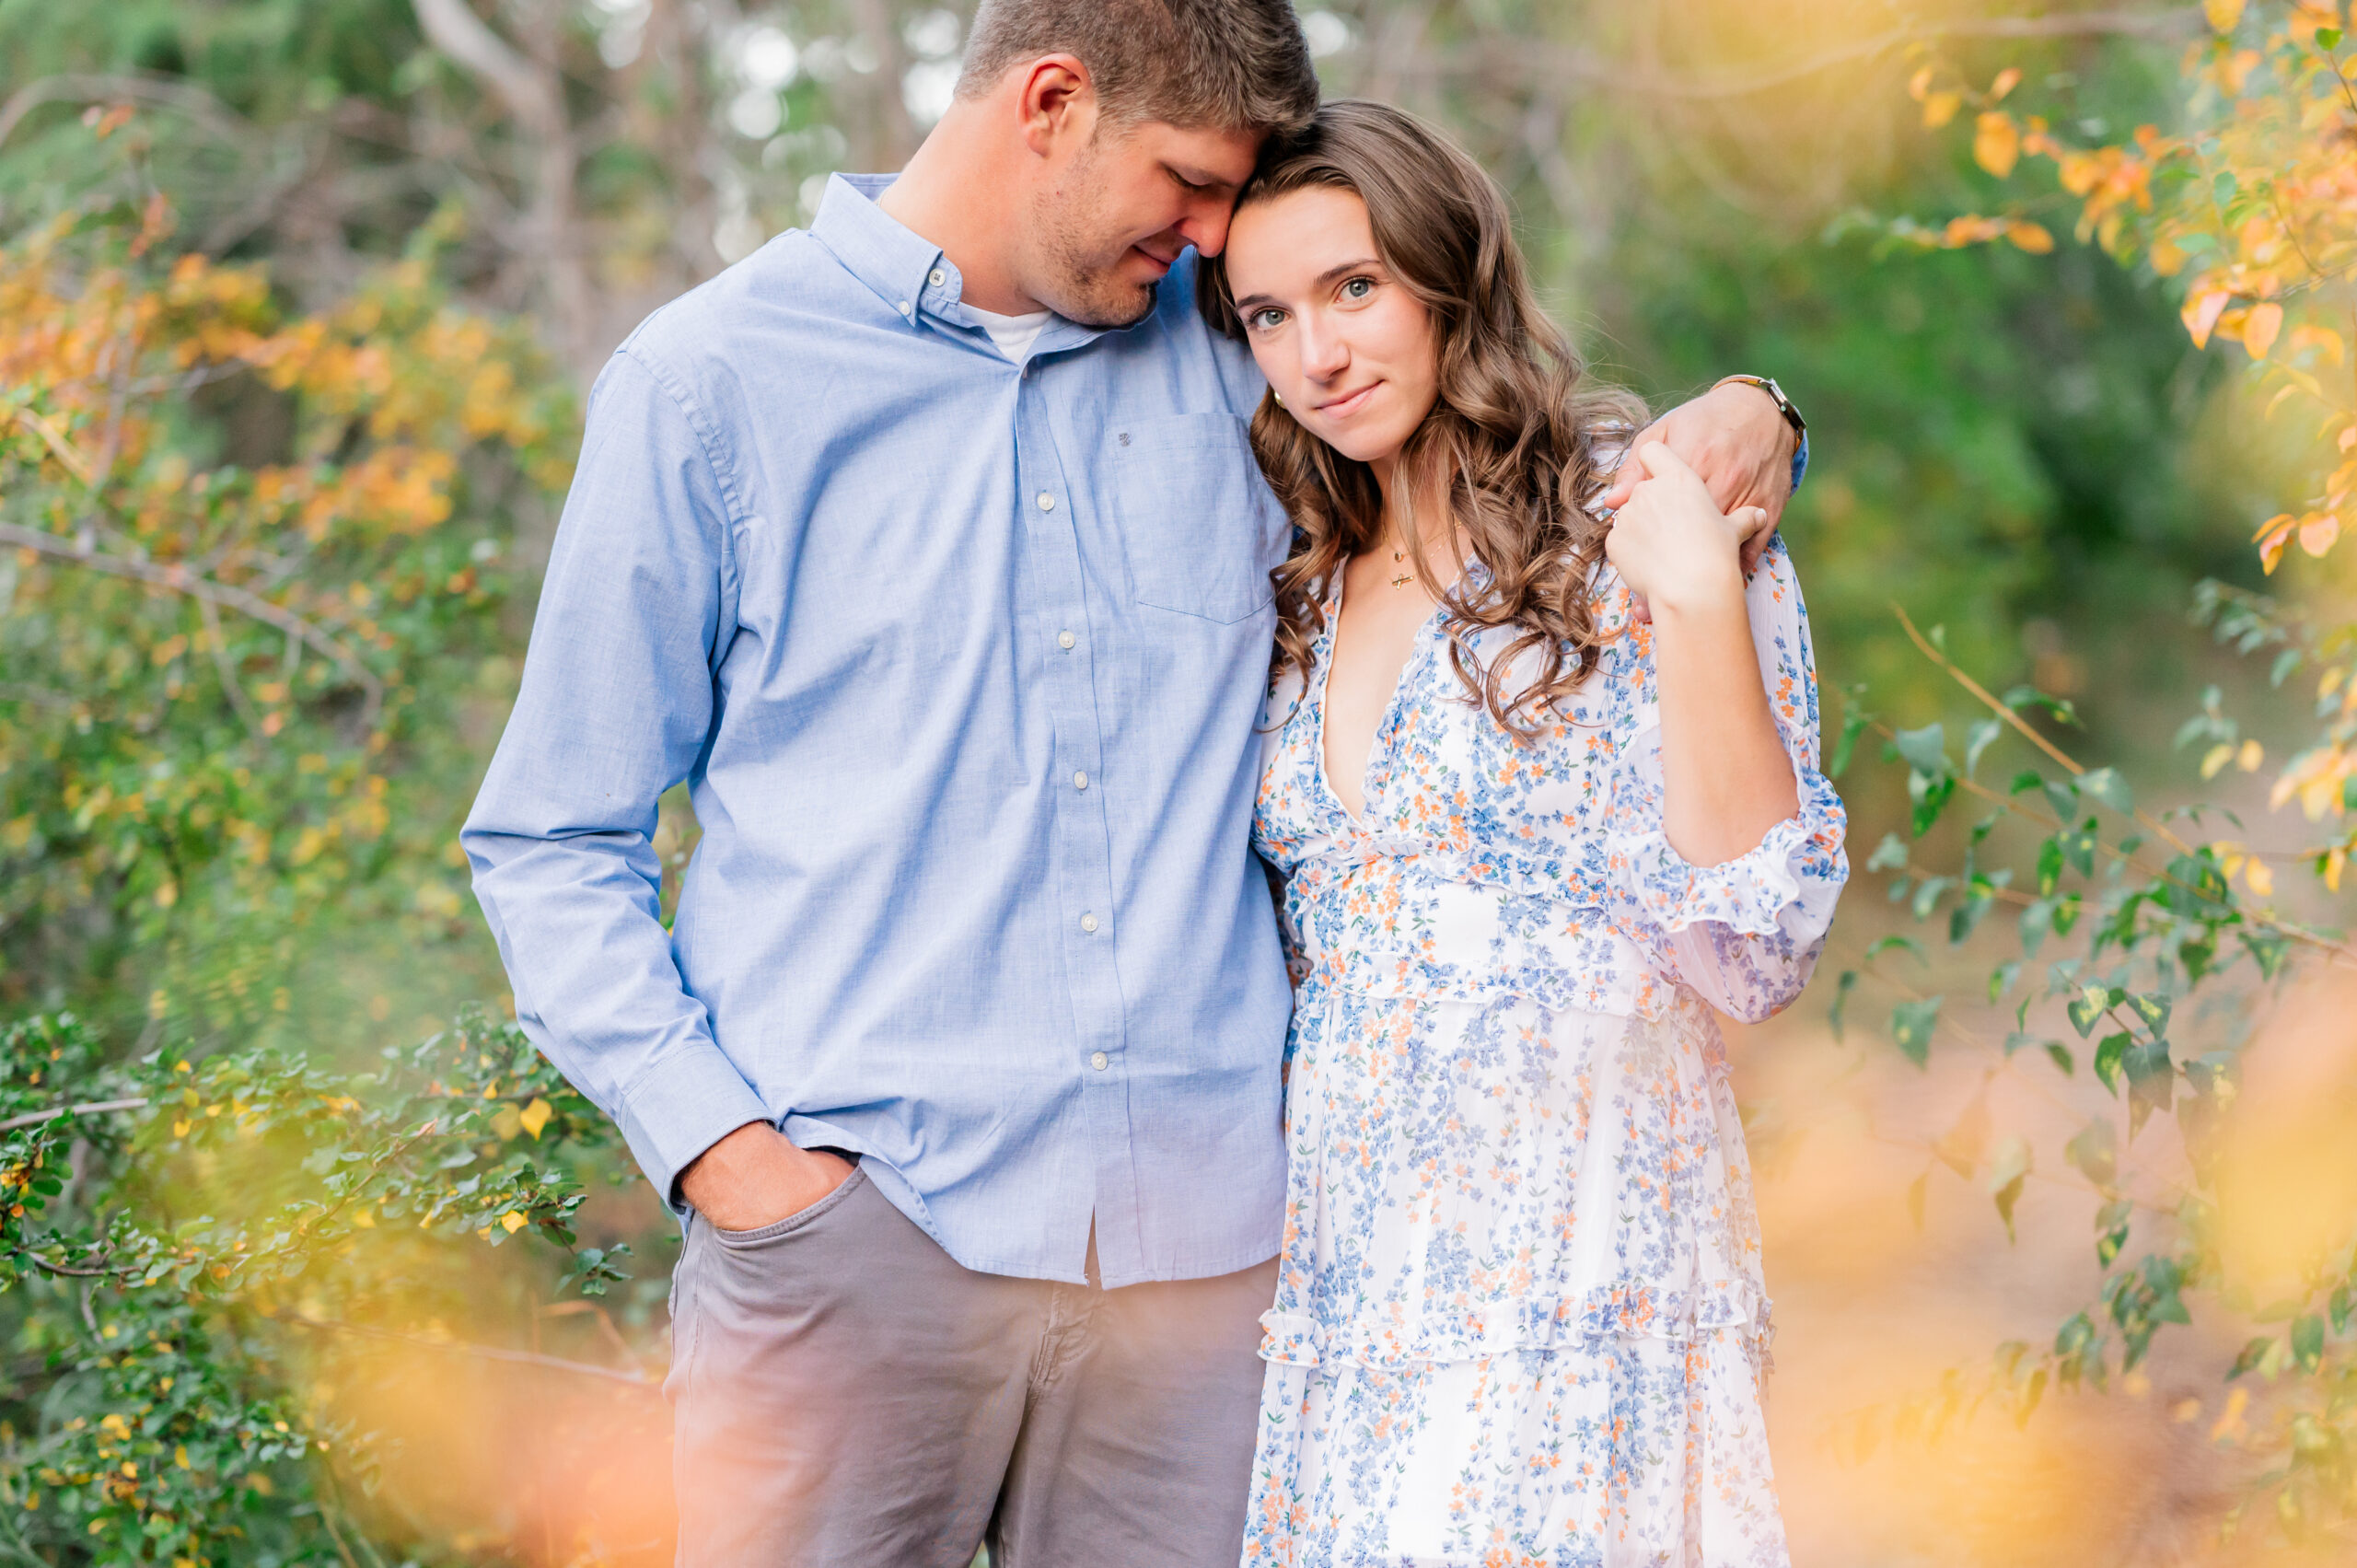 Megan and Jake's love story, marked by serendipitous meetings, a surprise engagement under fireworks, and cherished moments like strolling through the Rocky Mountains, culminates in their wedding at The Barn at Raccoon Creek. - Britni Girard Photography